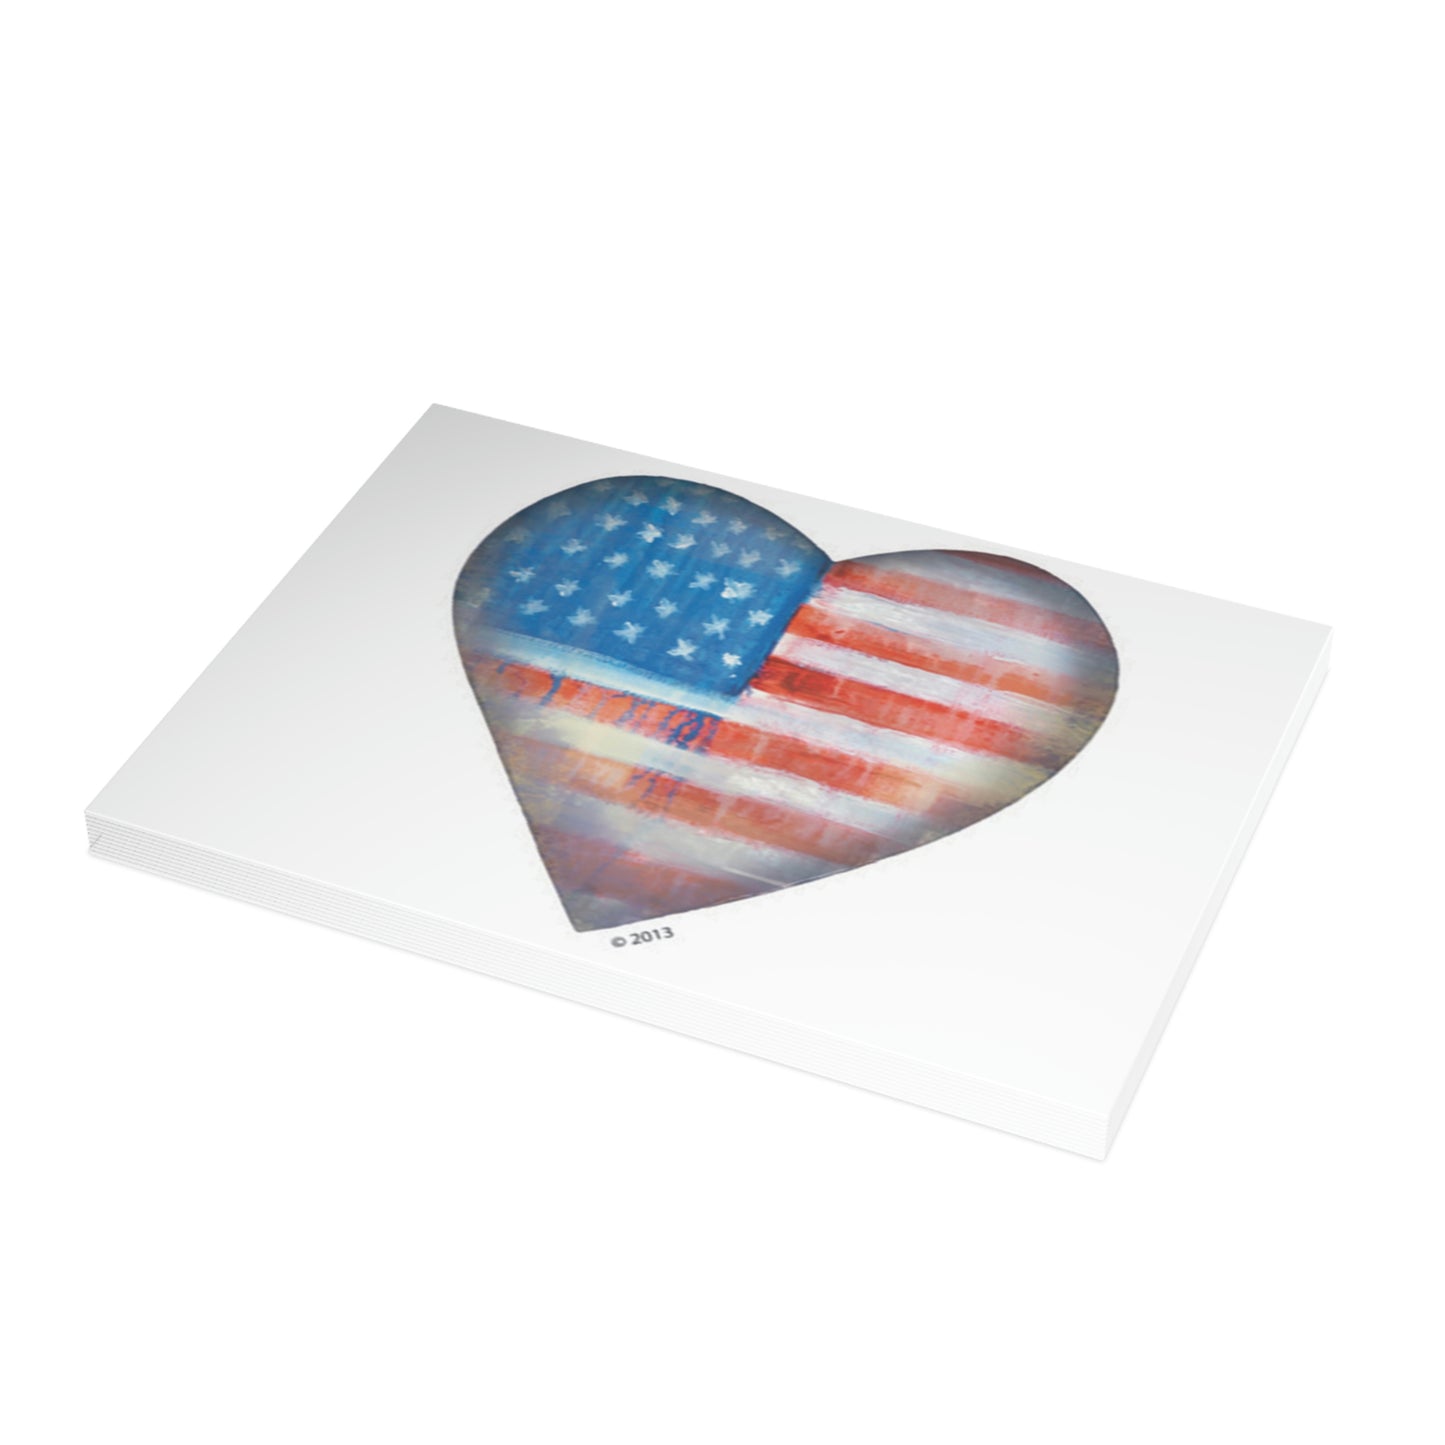 Greeting Cards - American Heart 1, 10, 20, & 50 pieces